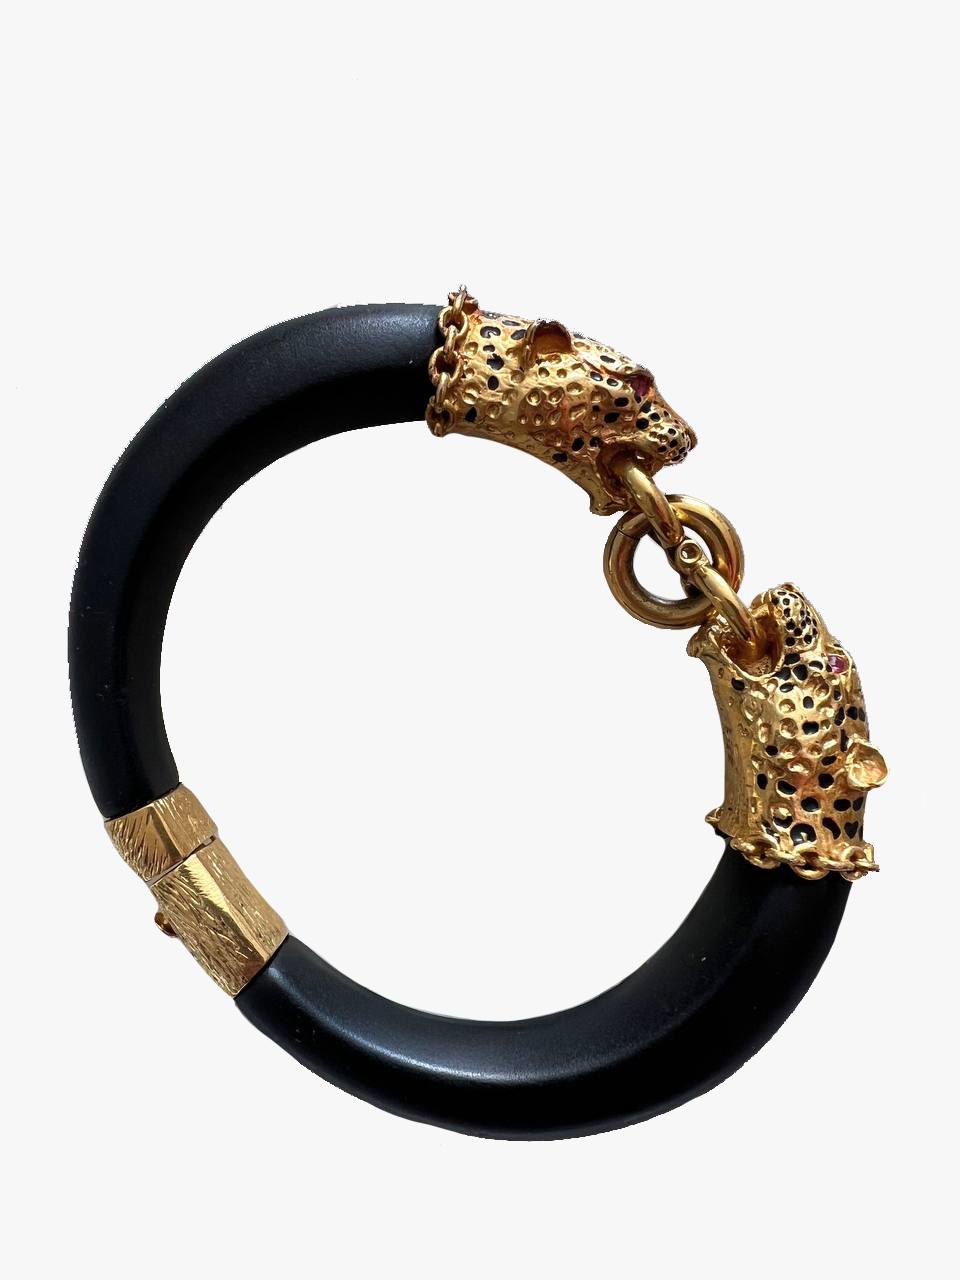 Bangle Bracelet that is signed with FM 87, made by the Franklin Mint, in 1987 as a limited edition.

The original was made for The Duchess of Windsor-Wallace Simpson.

This piece is made of ebony wood with 22Karat Gold Electroplated Panther Heads